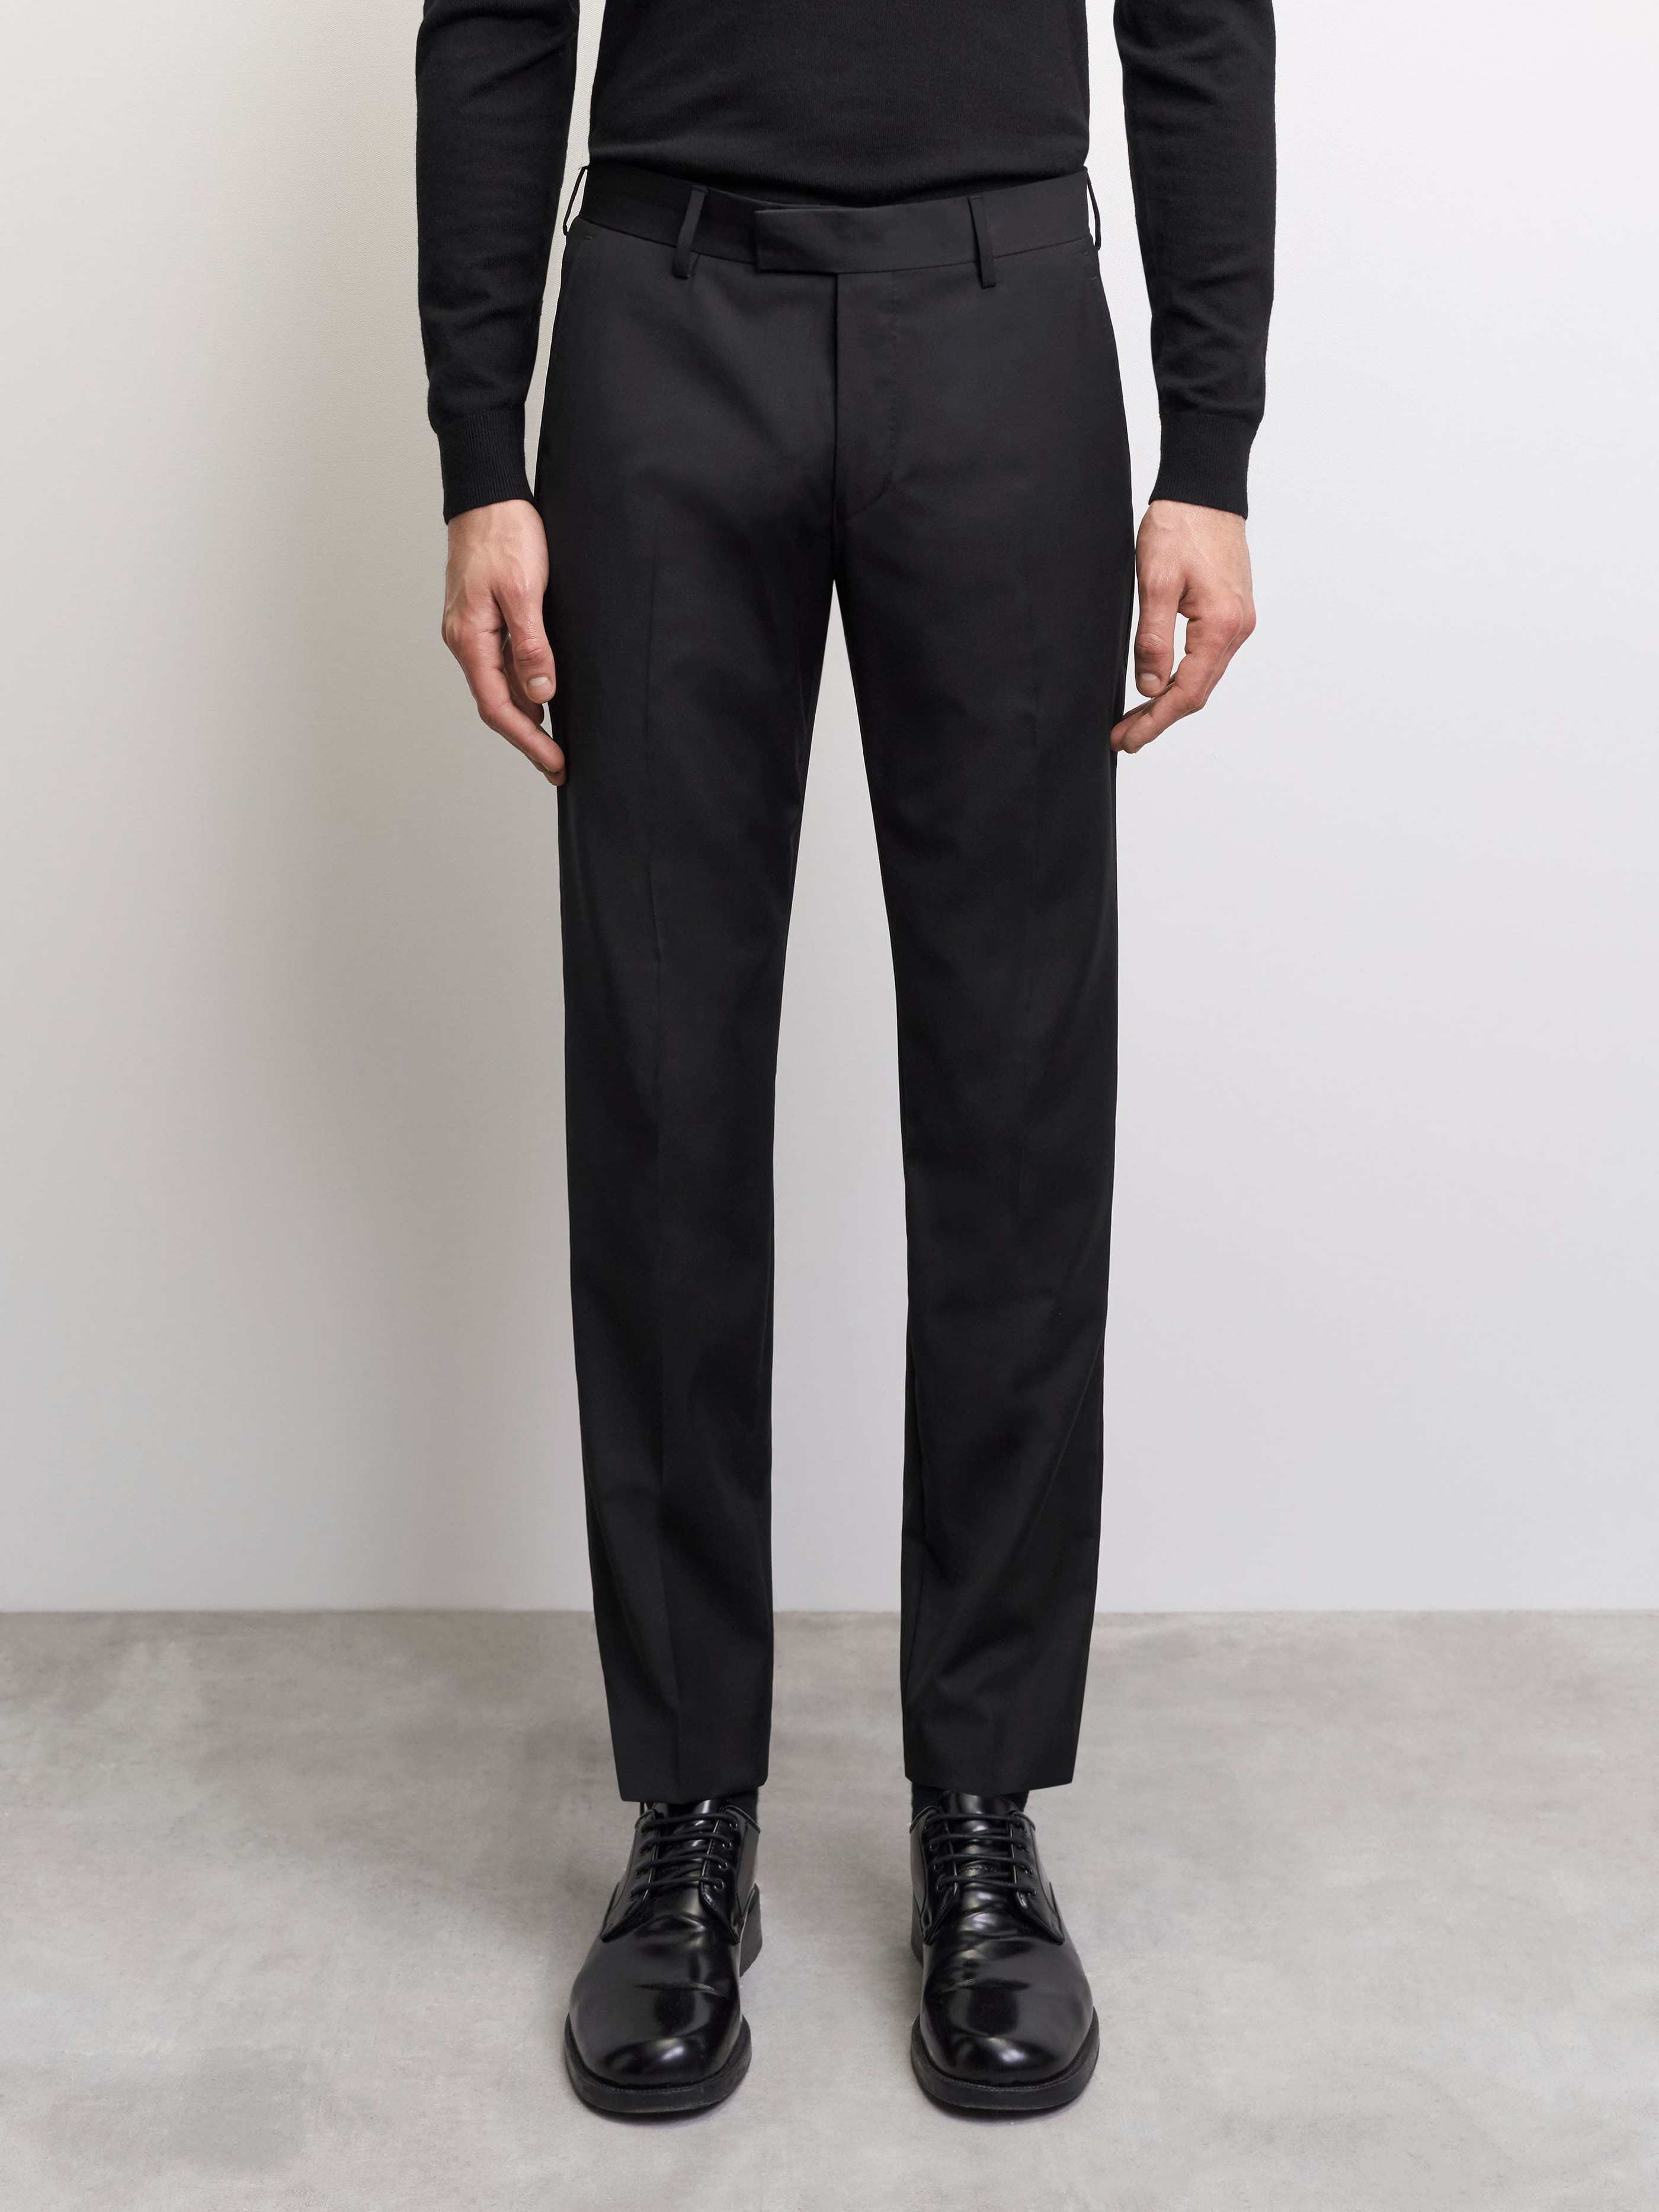 TIGER OF SWEDEN Tenutas Trousers in Black T70698004Z 48 050-BLACK FROM EIGHTYWINGOLD - OFFICIAL BRAND PARTNER